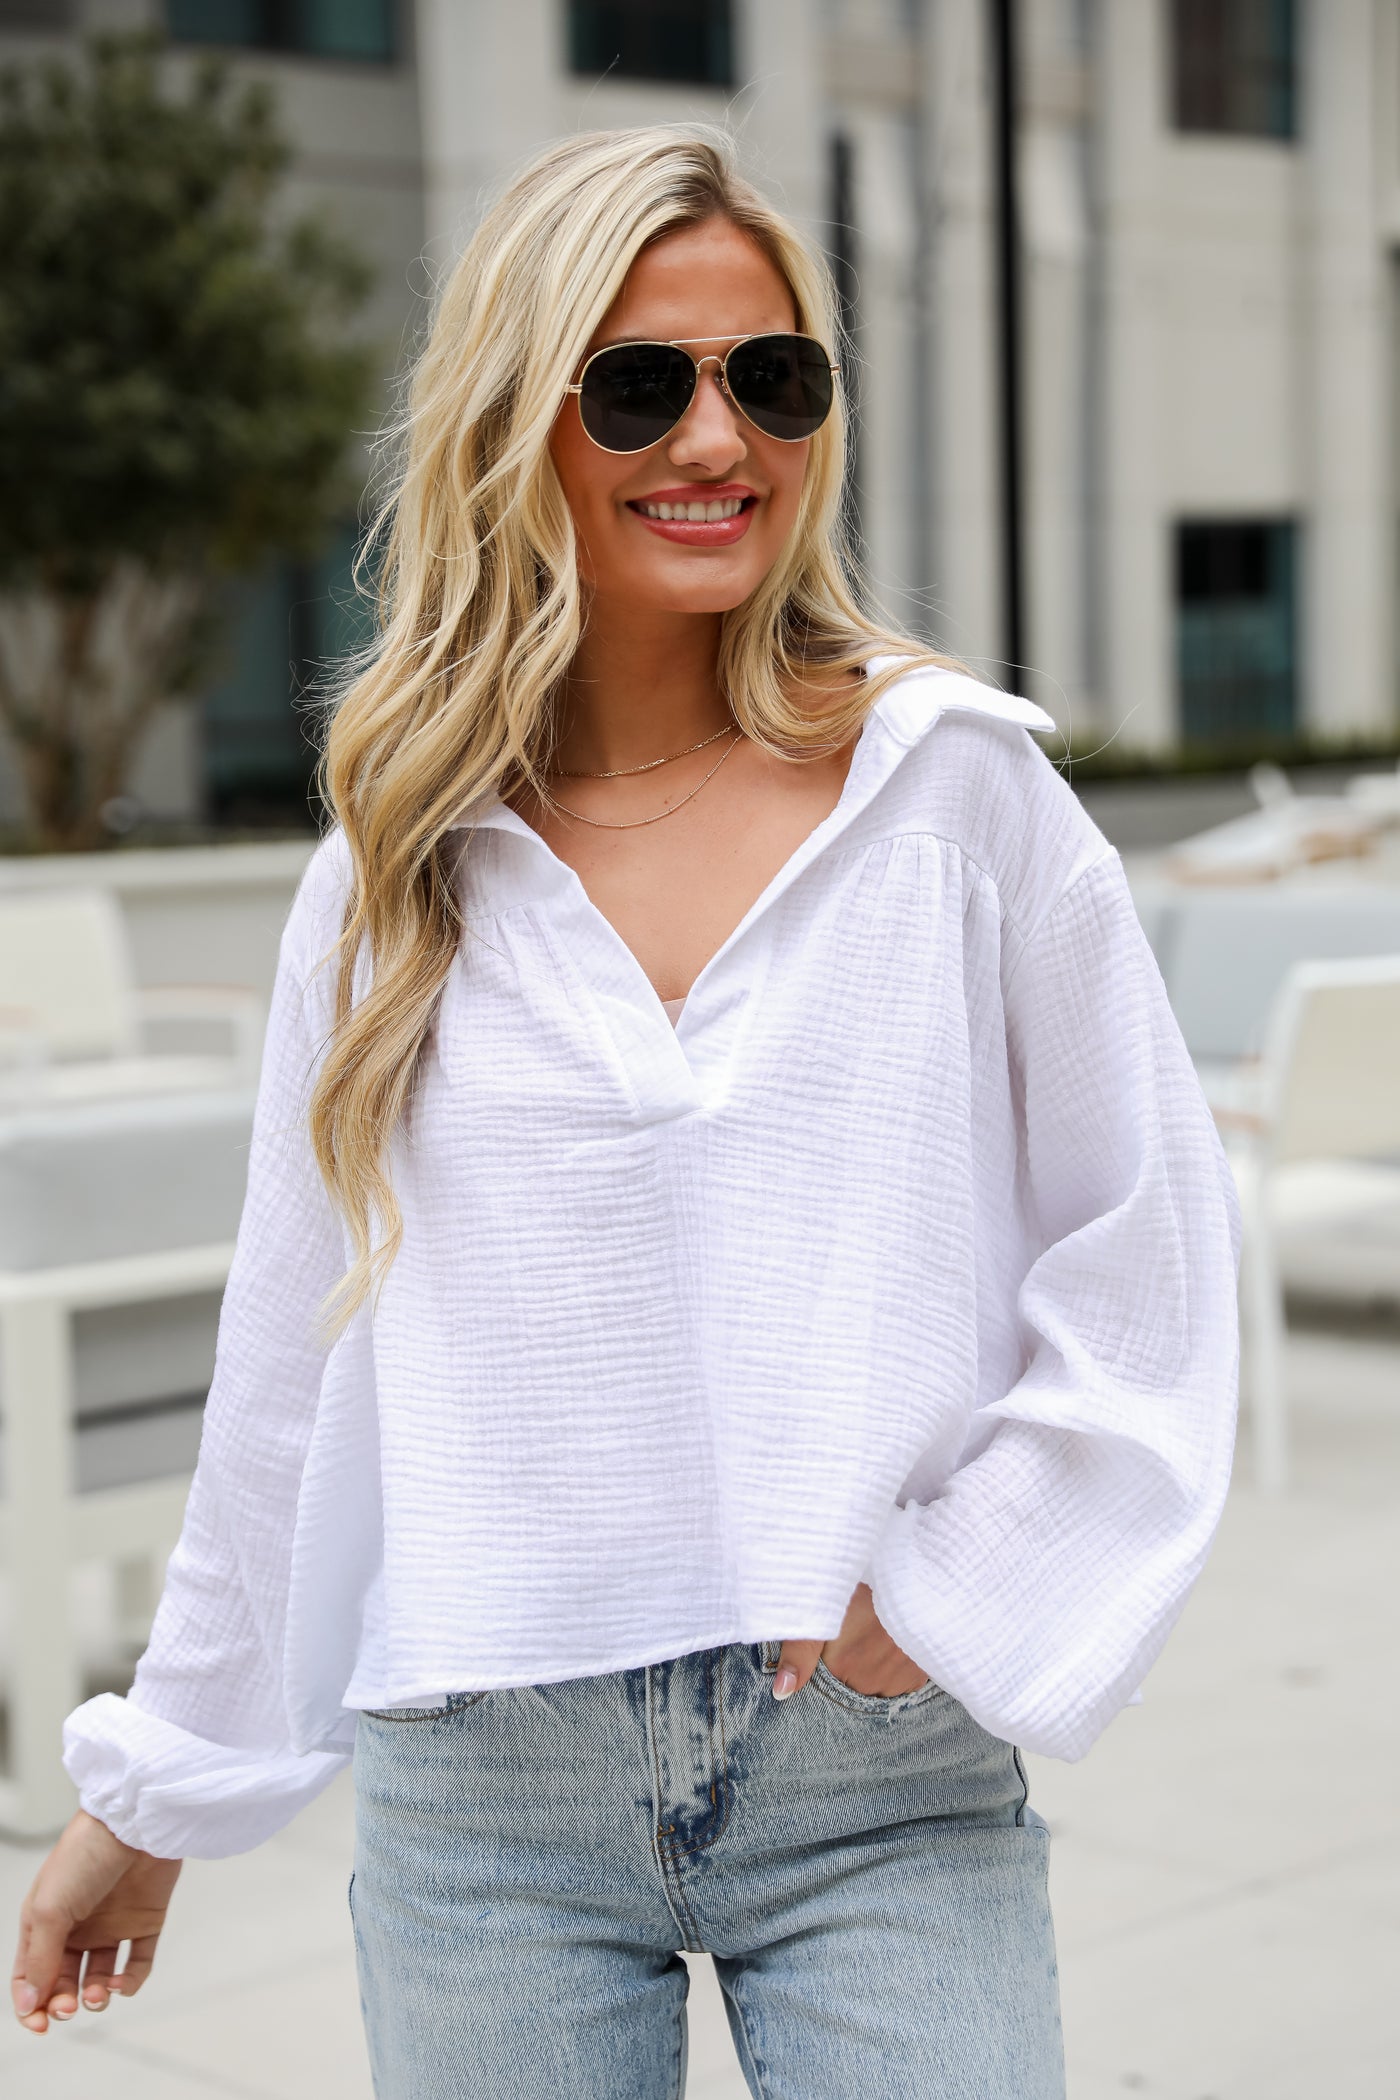 Alanna Linen Blouse is a Lightweight Crinkle Linen top, with a Collared V-Neckline, Long Balloon Sleeves with Elastic Cuffs. Relaxed Fit, 100% Cotton, and the perfect shade of blue and white. boutique tops. Women tops for summer. 